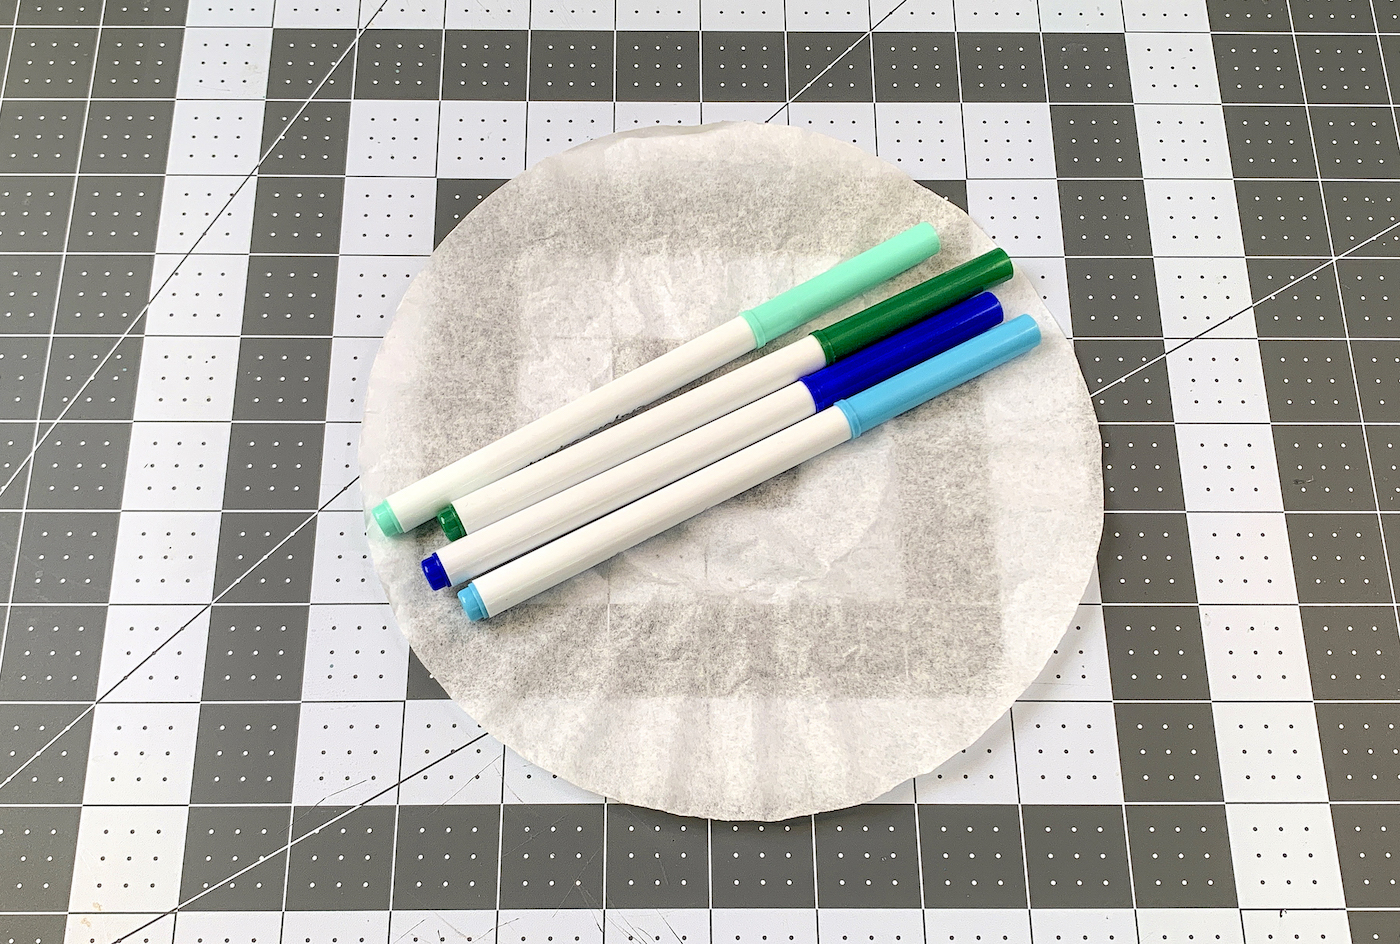 Coffee filter with blue and green markers on top